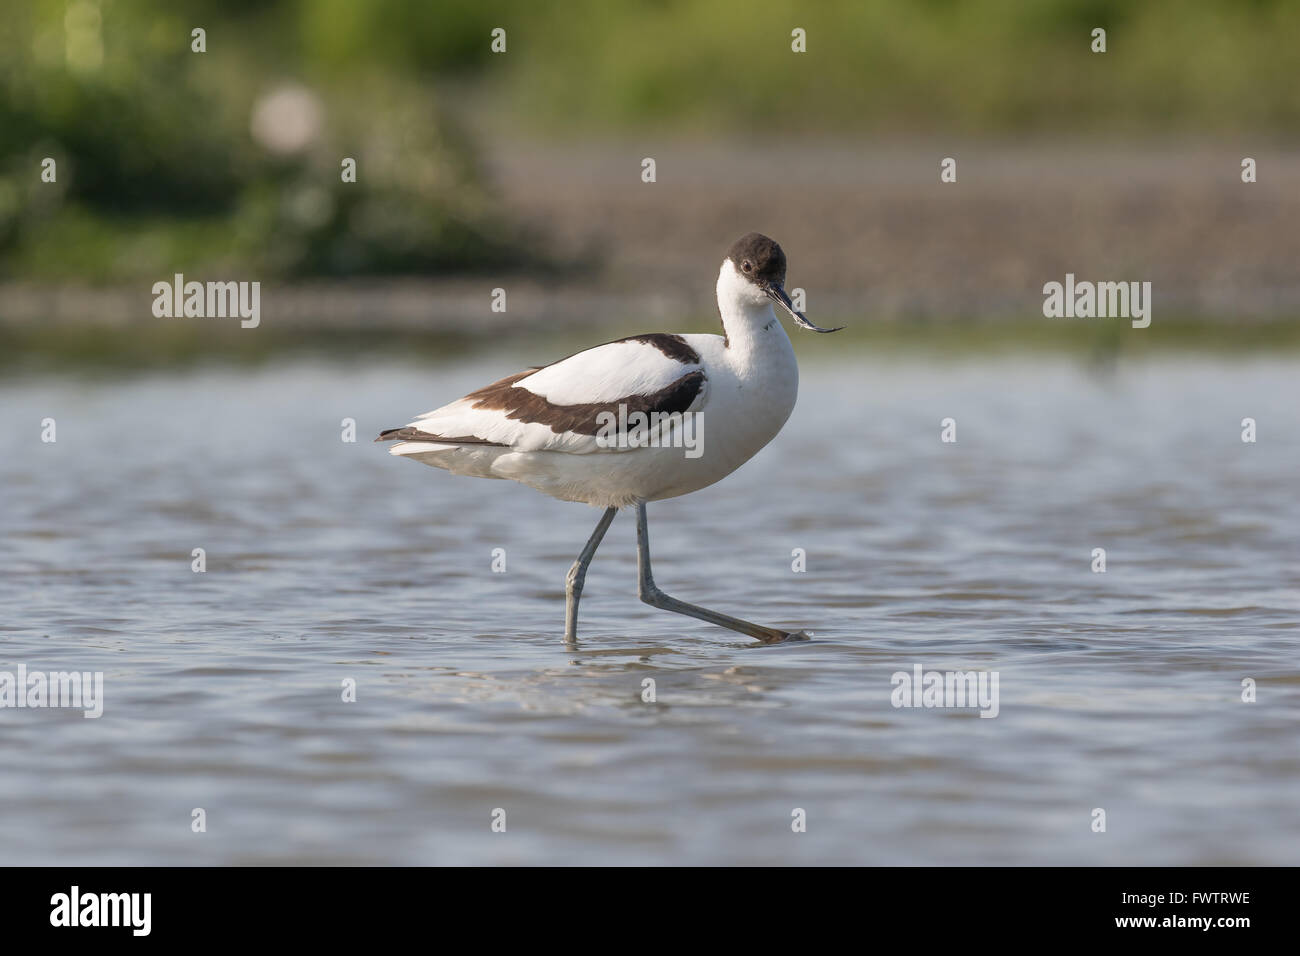 Pied avocet walking with long legs in shallow water Stock Photo